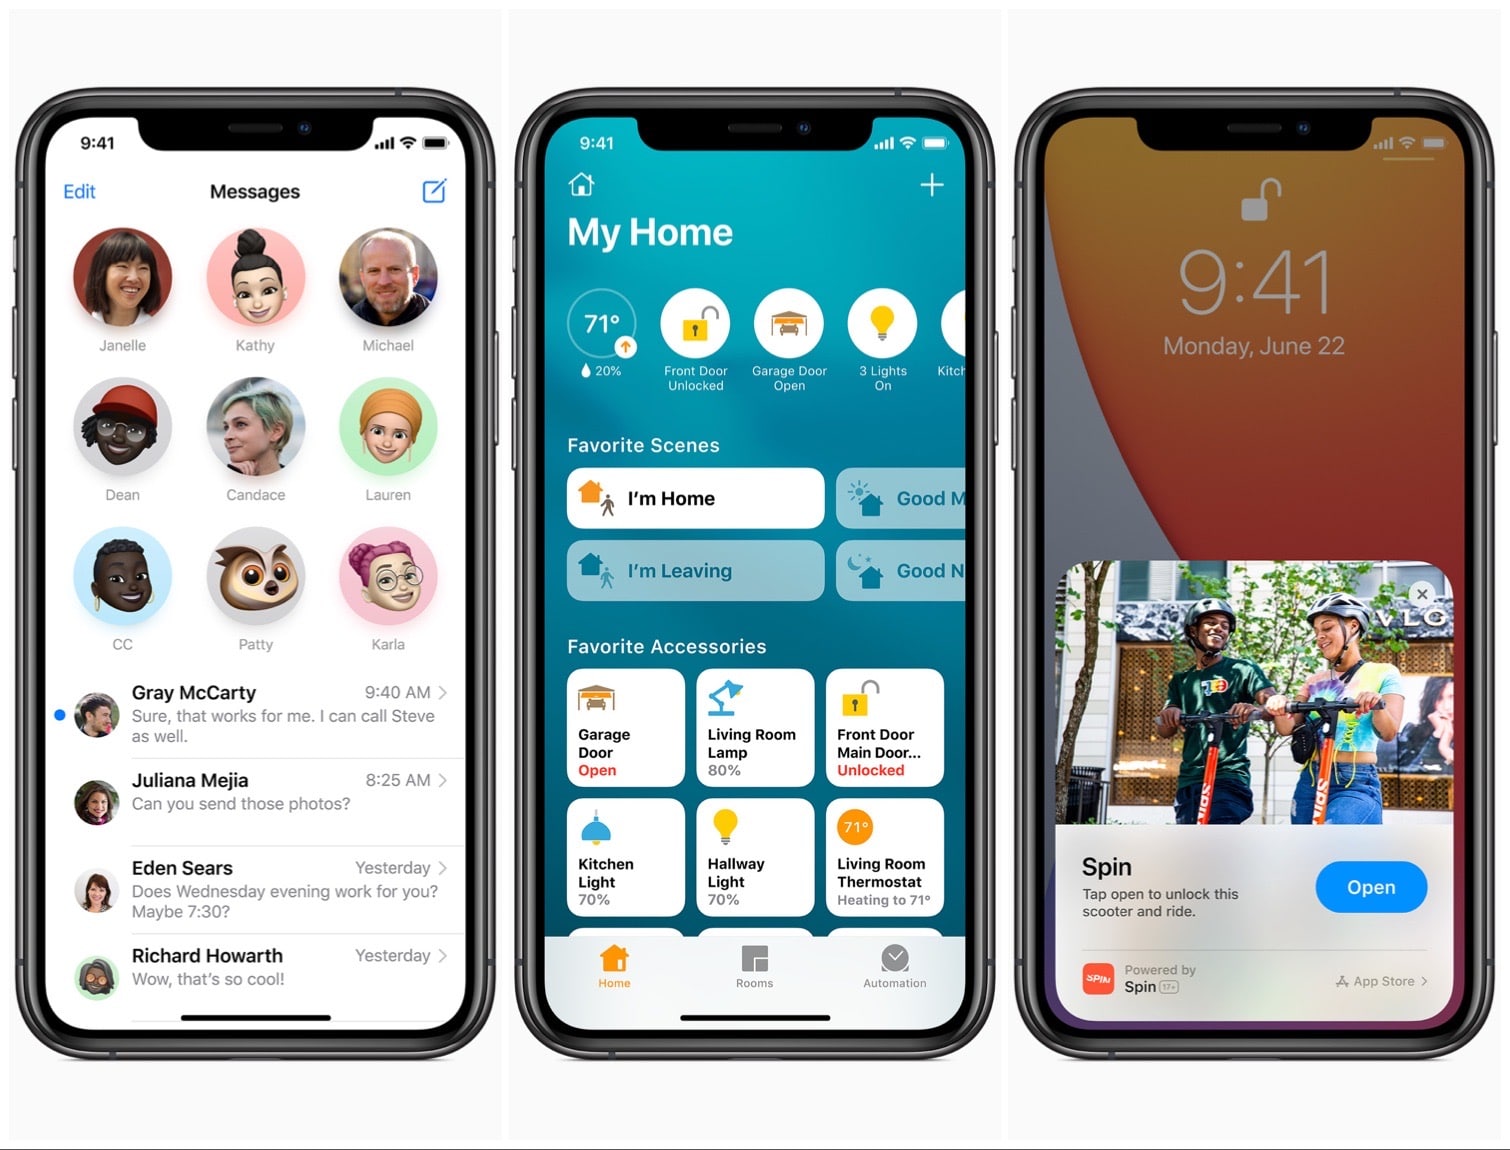 Features of iOS 14